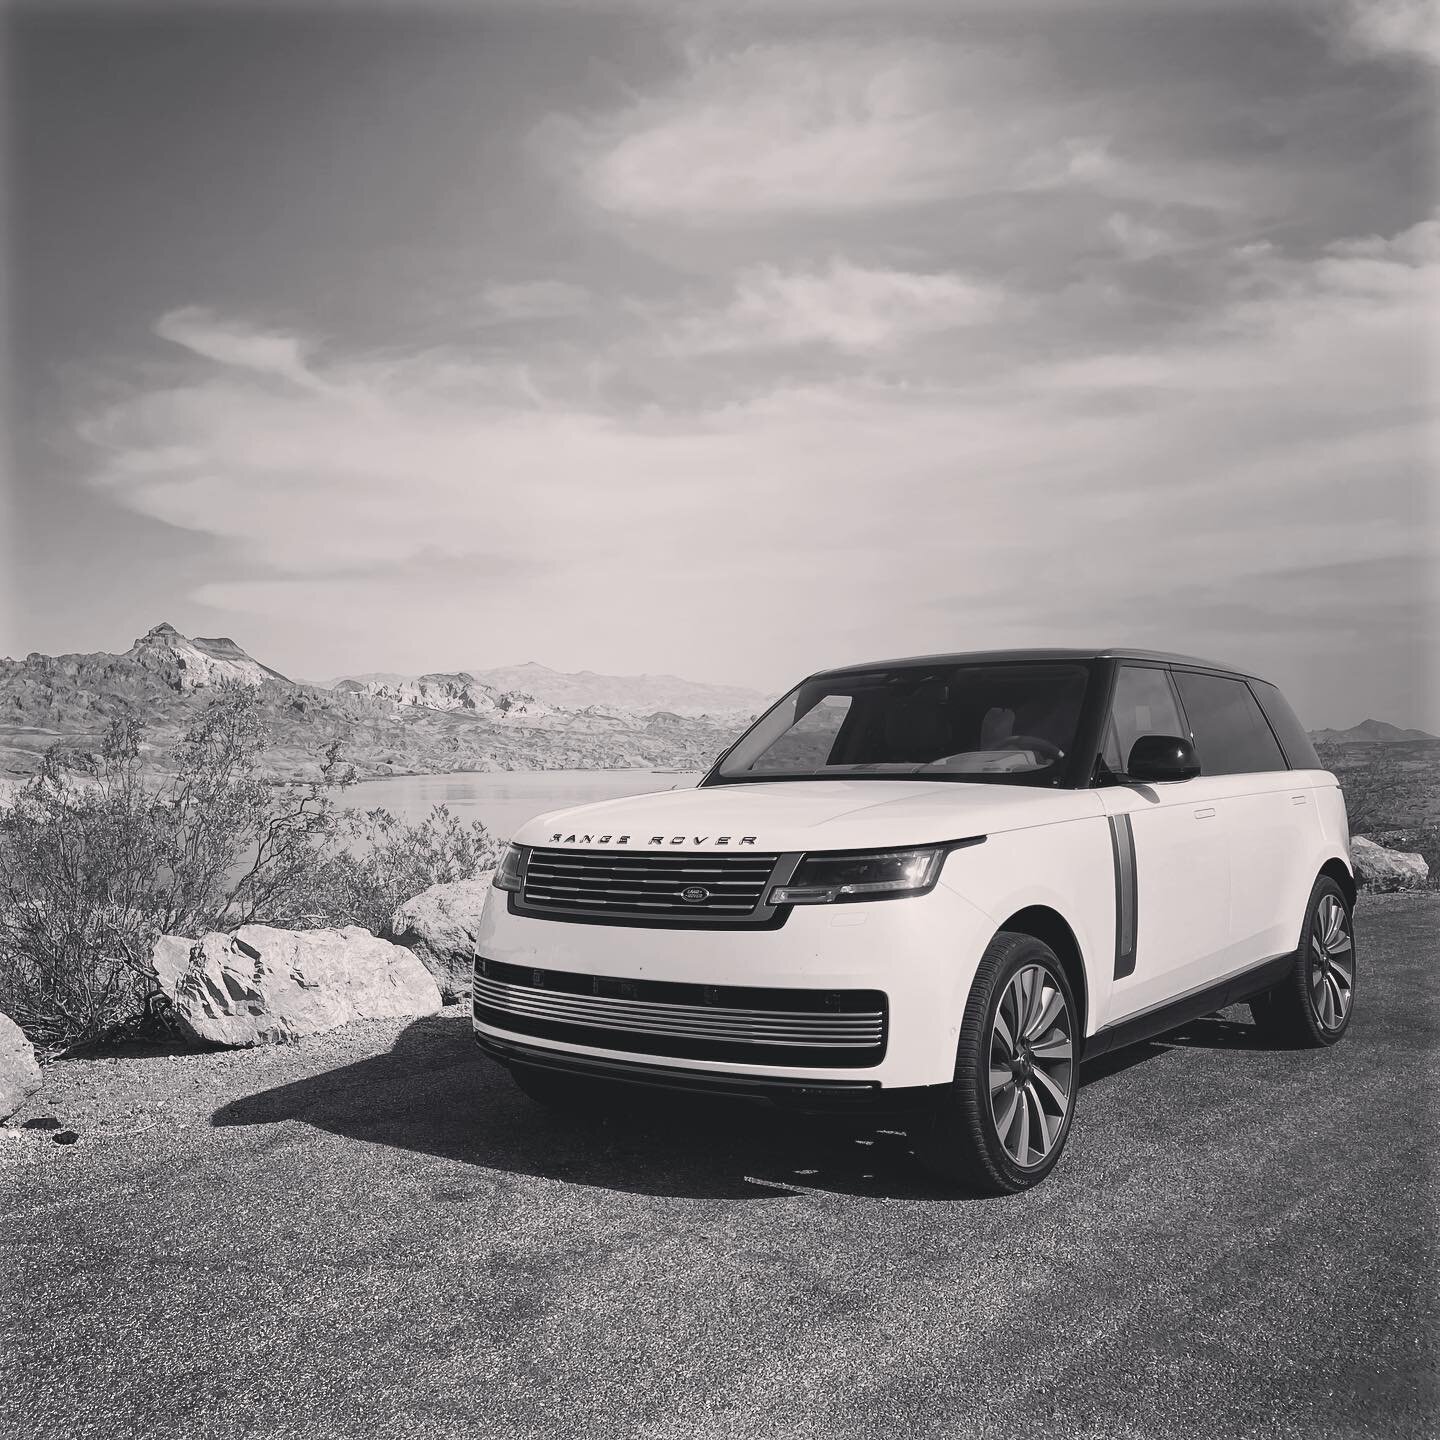 The New Range Rover enjoying its new home for the next few months. 

#rangerover #landroverusa #landrover